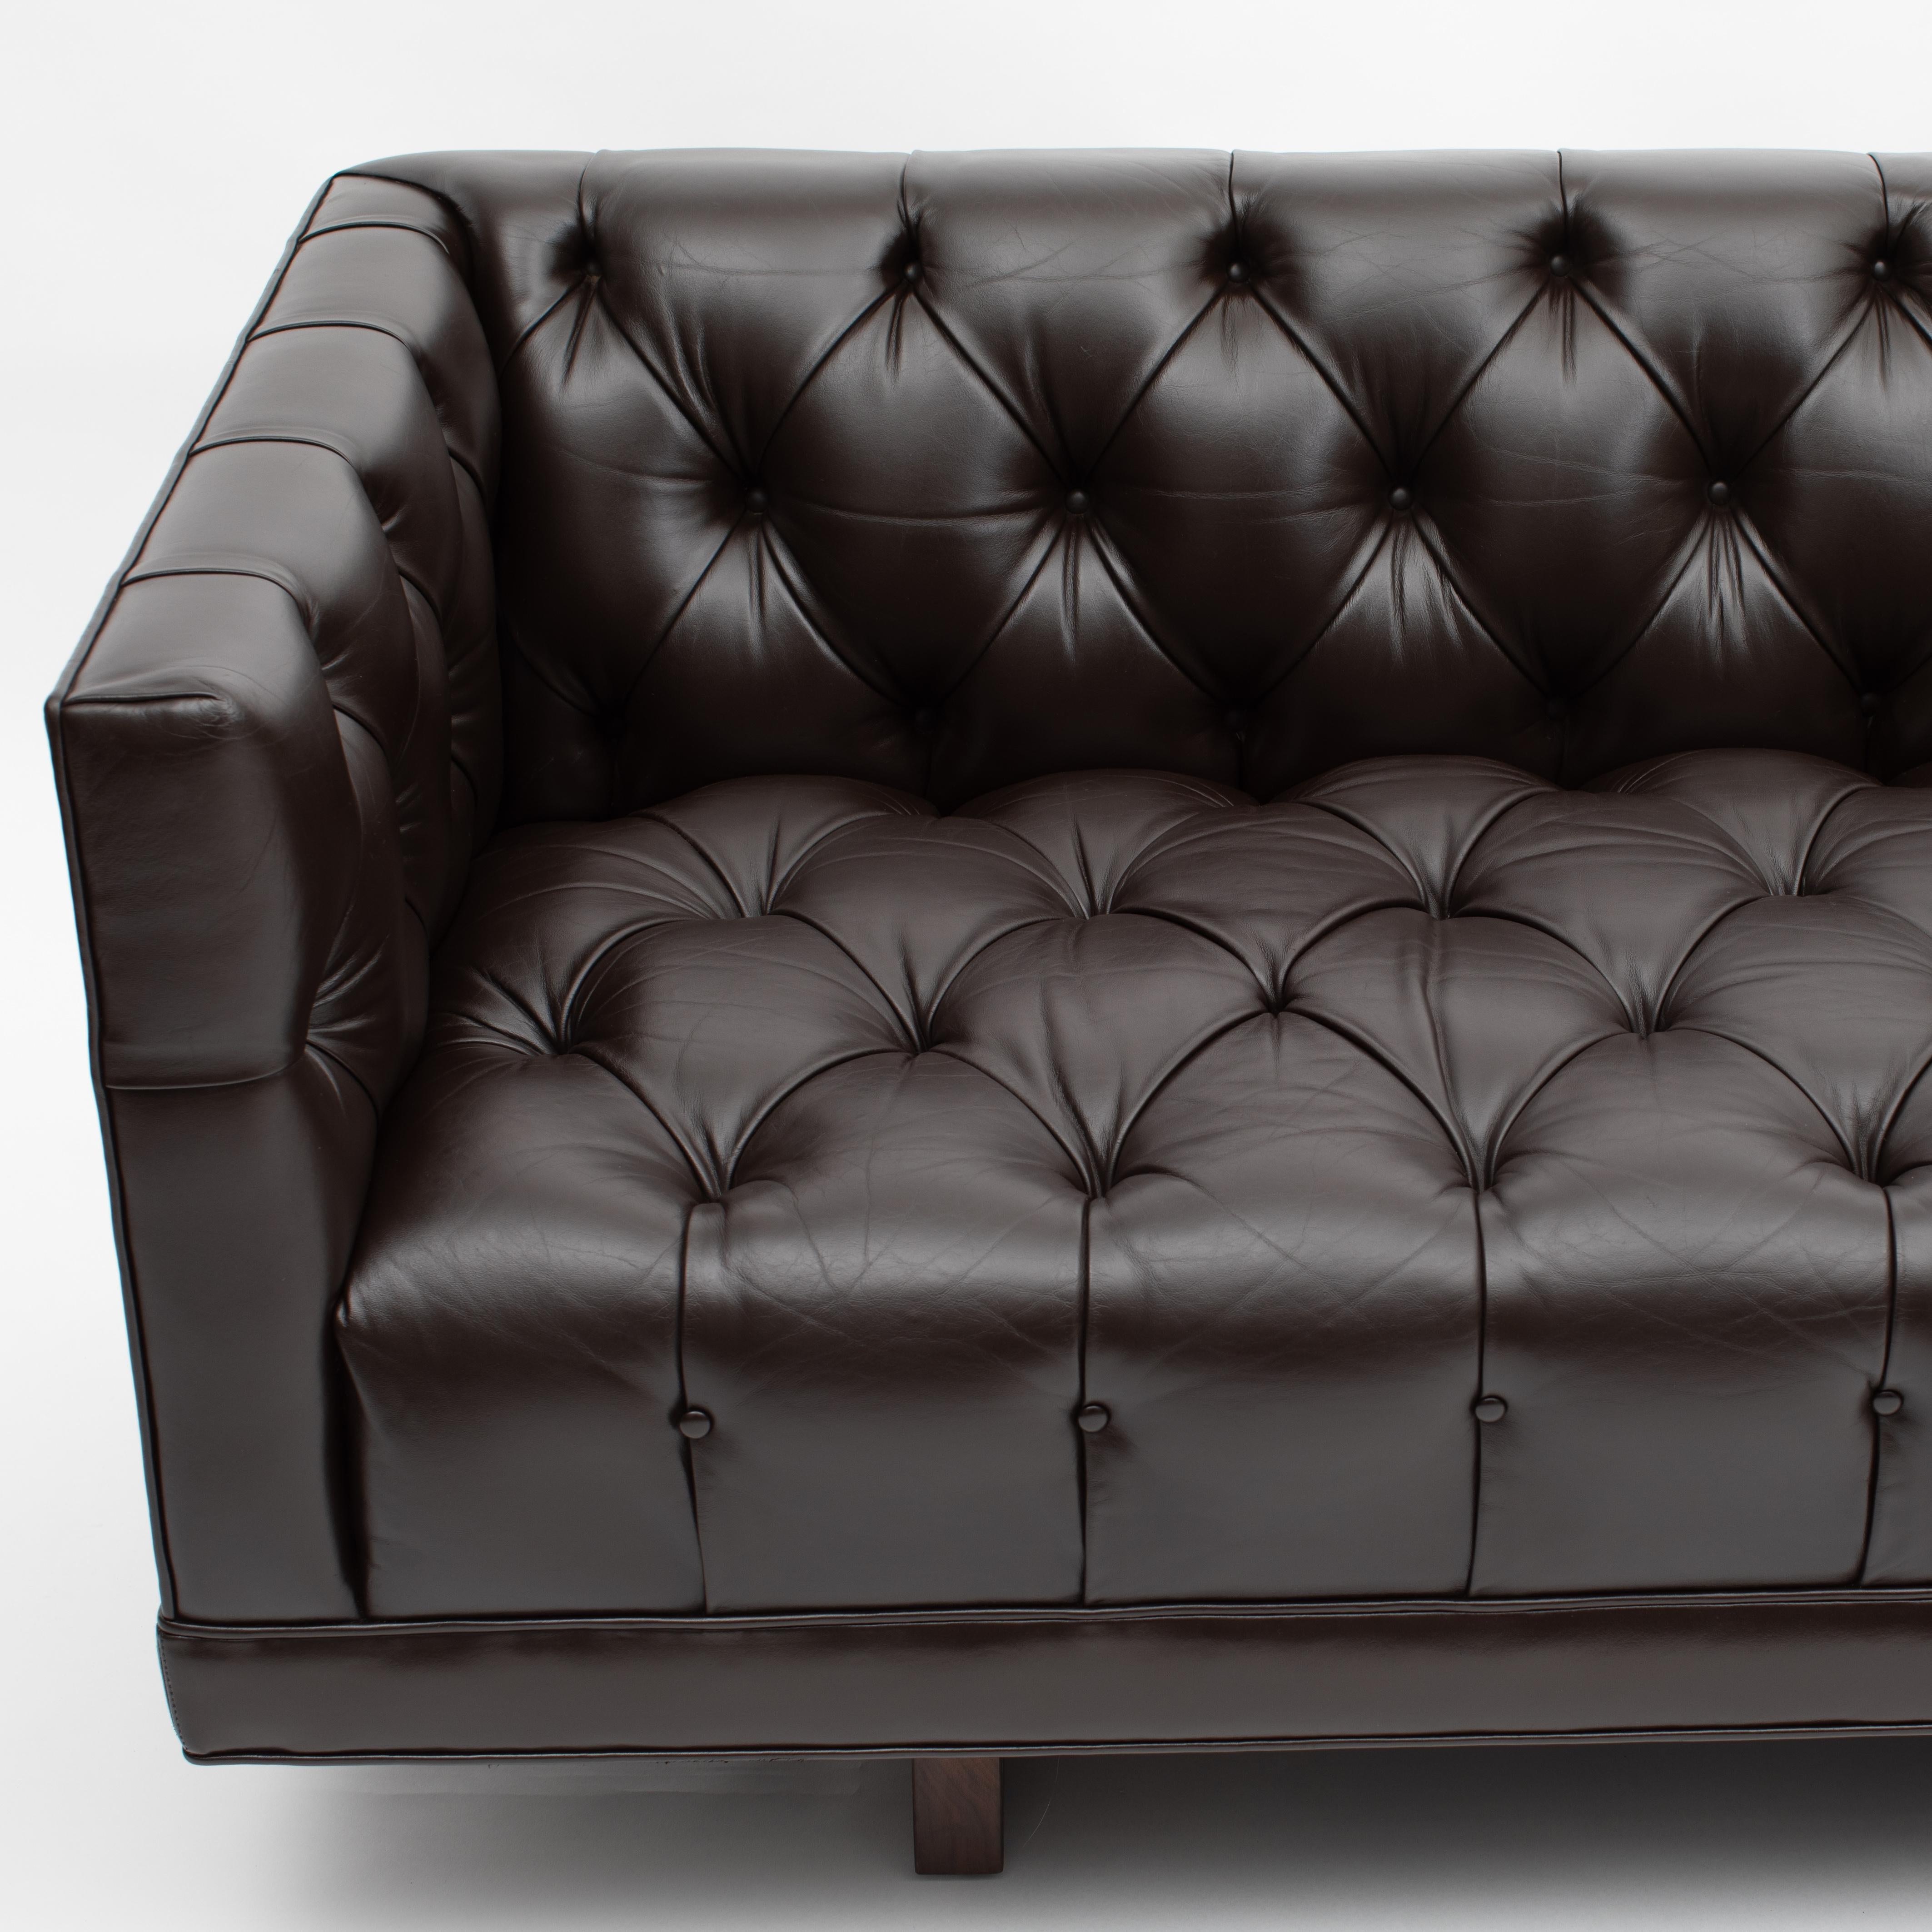 Ward Bennett Button-Tufted Leather Sofa for Lehigh Furniture, circa 1960s In Good Condition For Sale In Brooklyn, NY